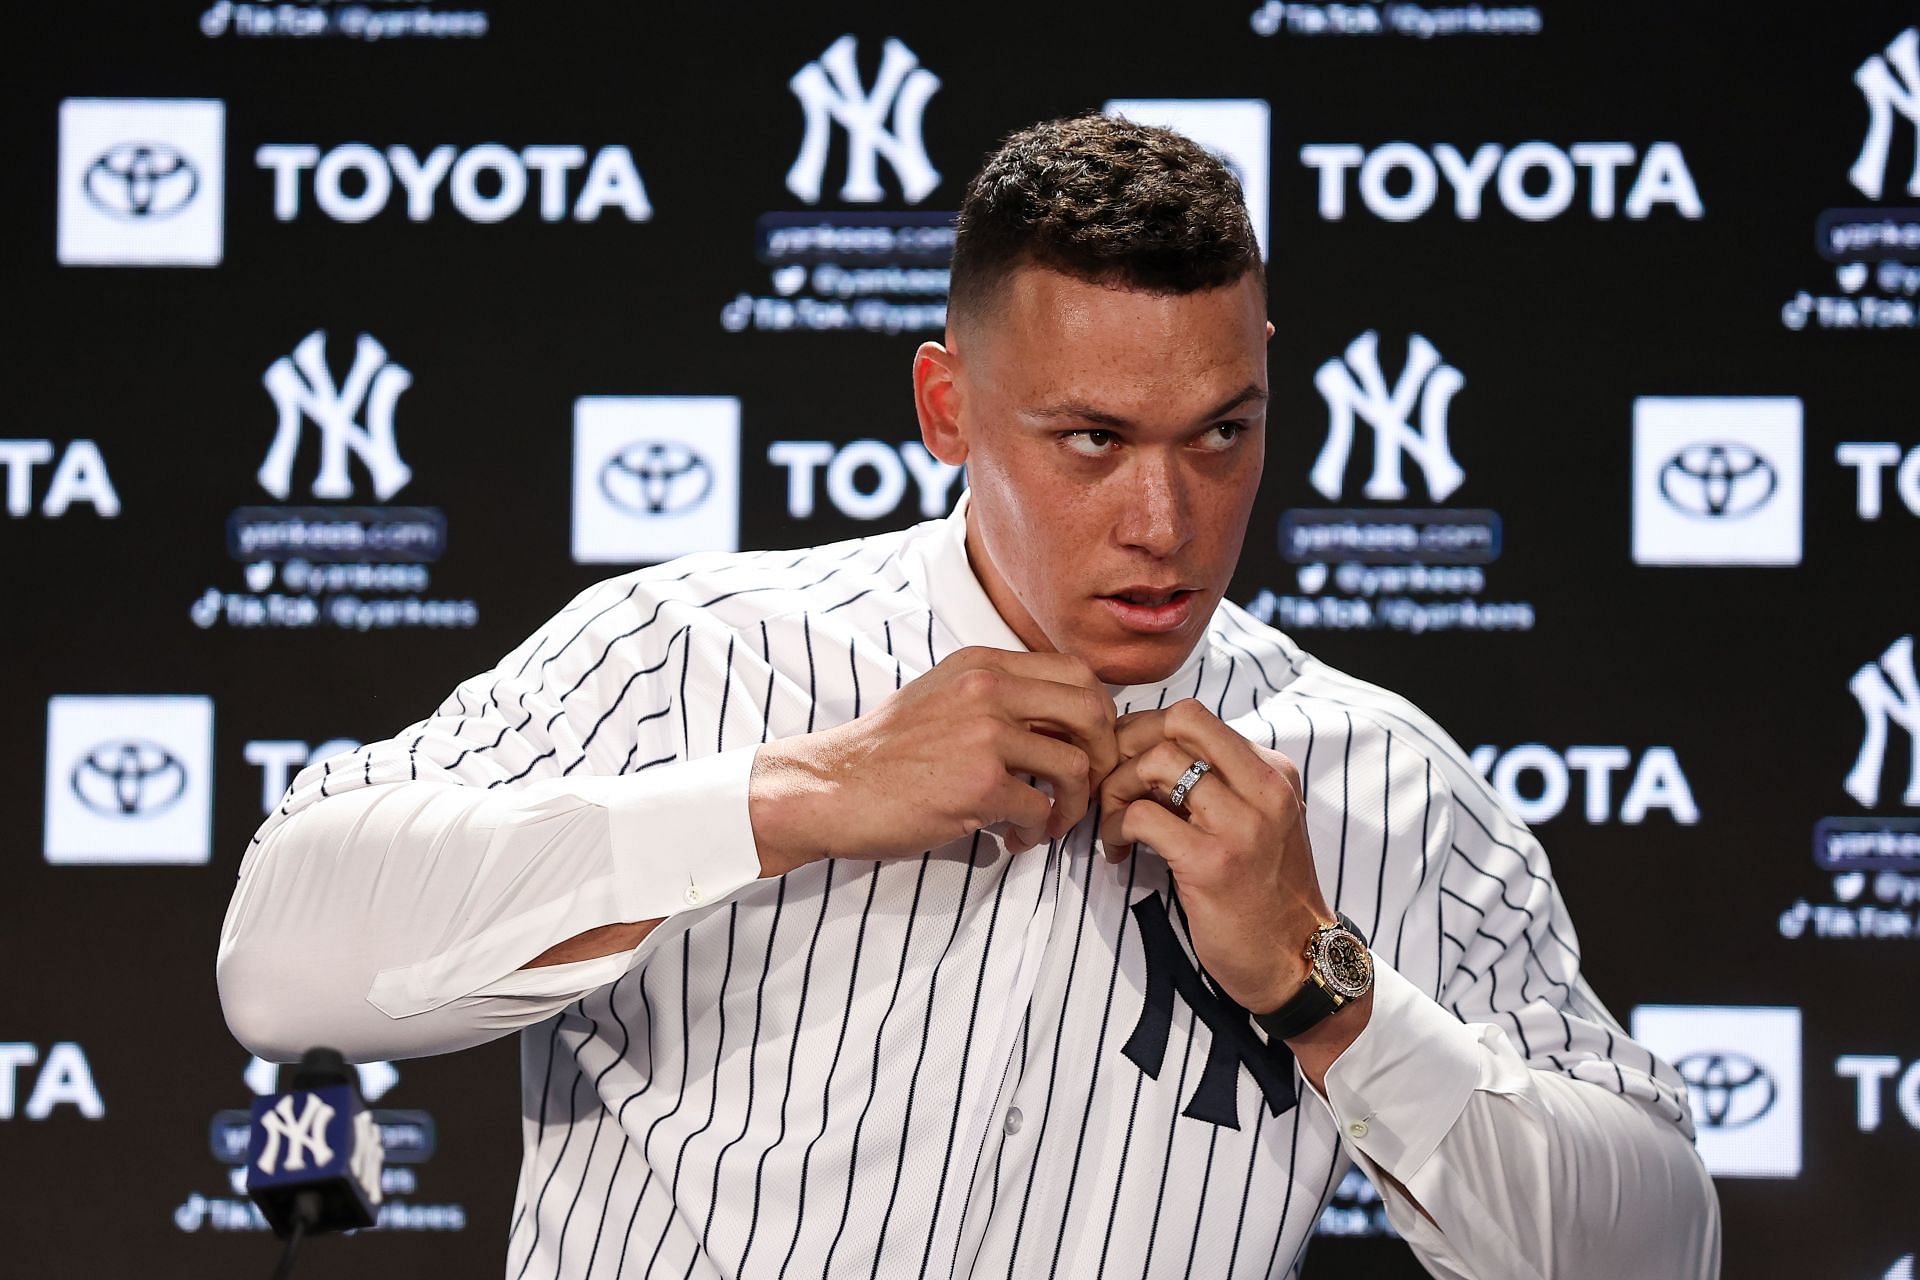 Dom on X: Make these the Yankees' city connect jerseys imo   / X